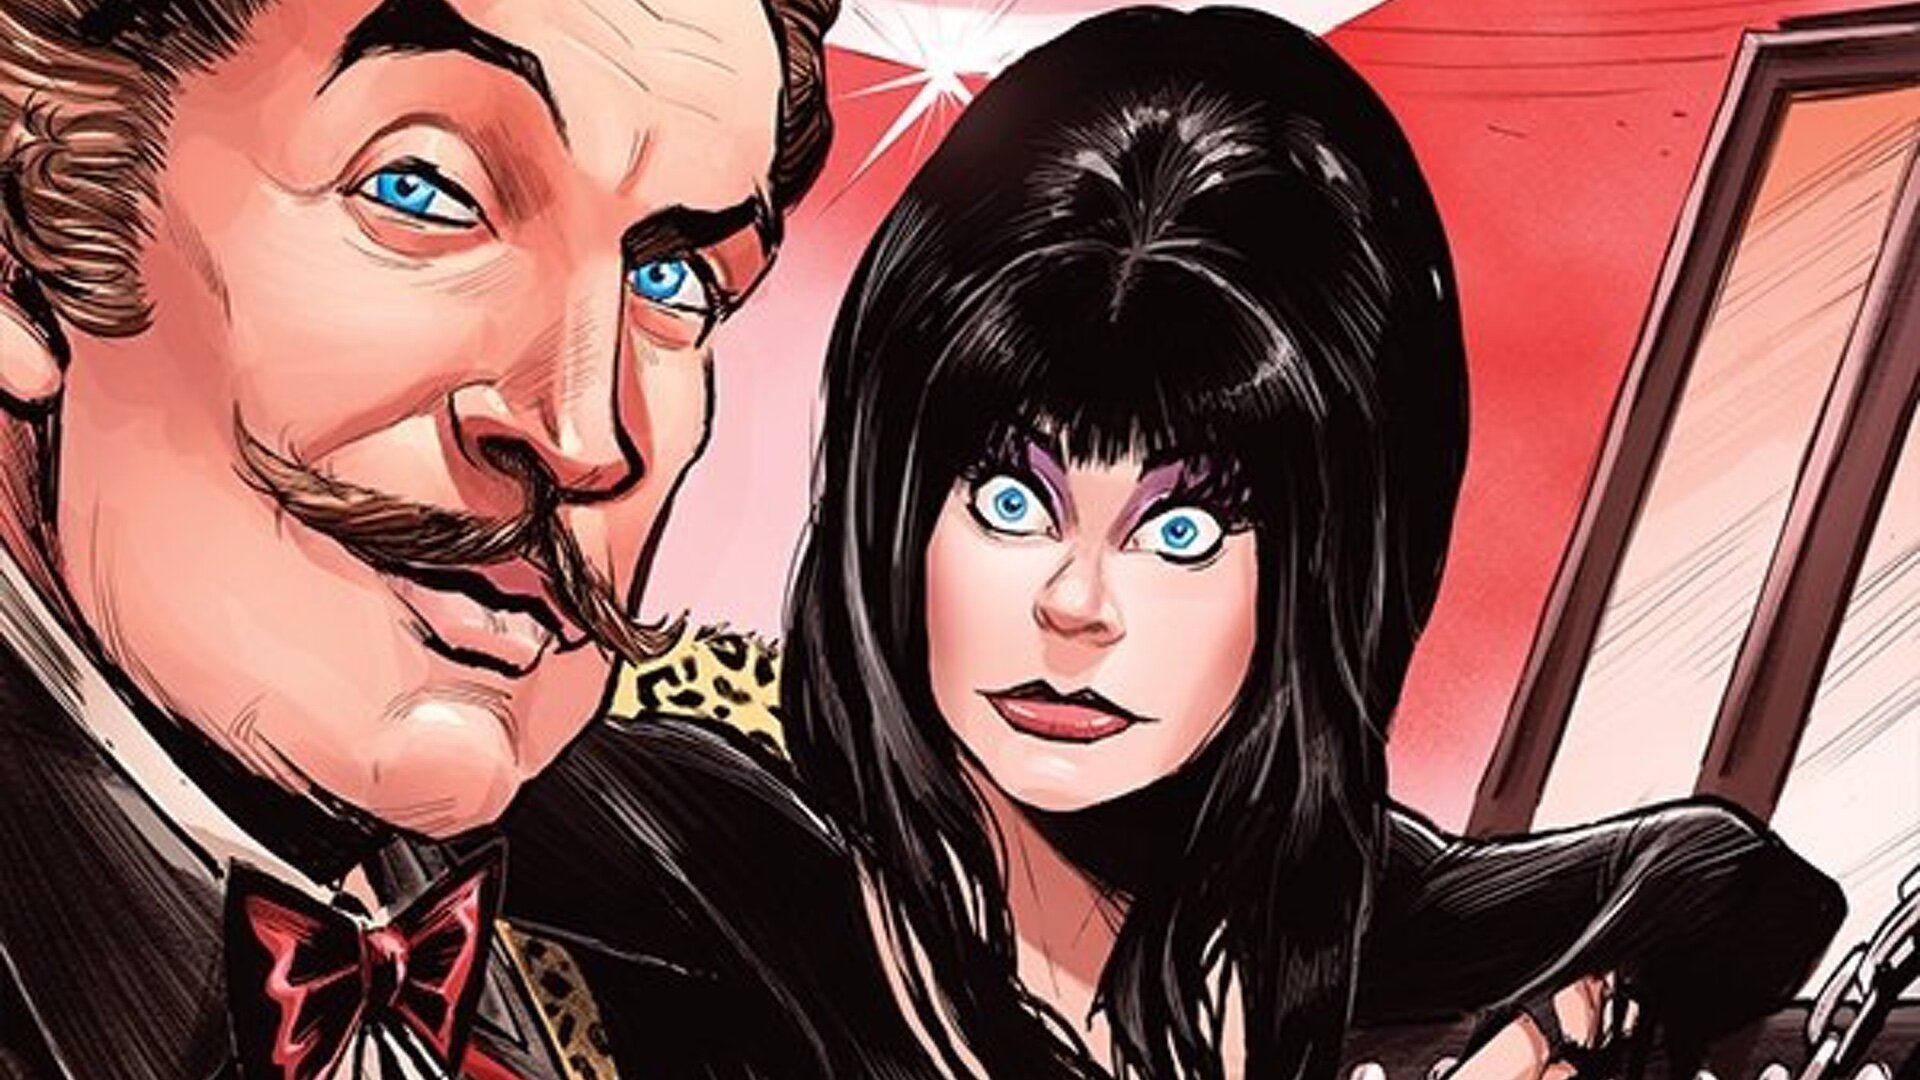 Vincent Price And Elvira Team Up In A New Ic Series